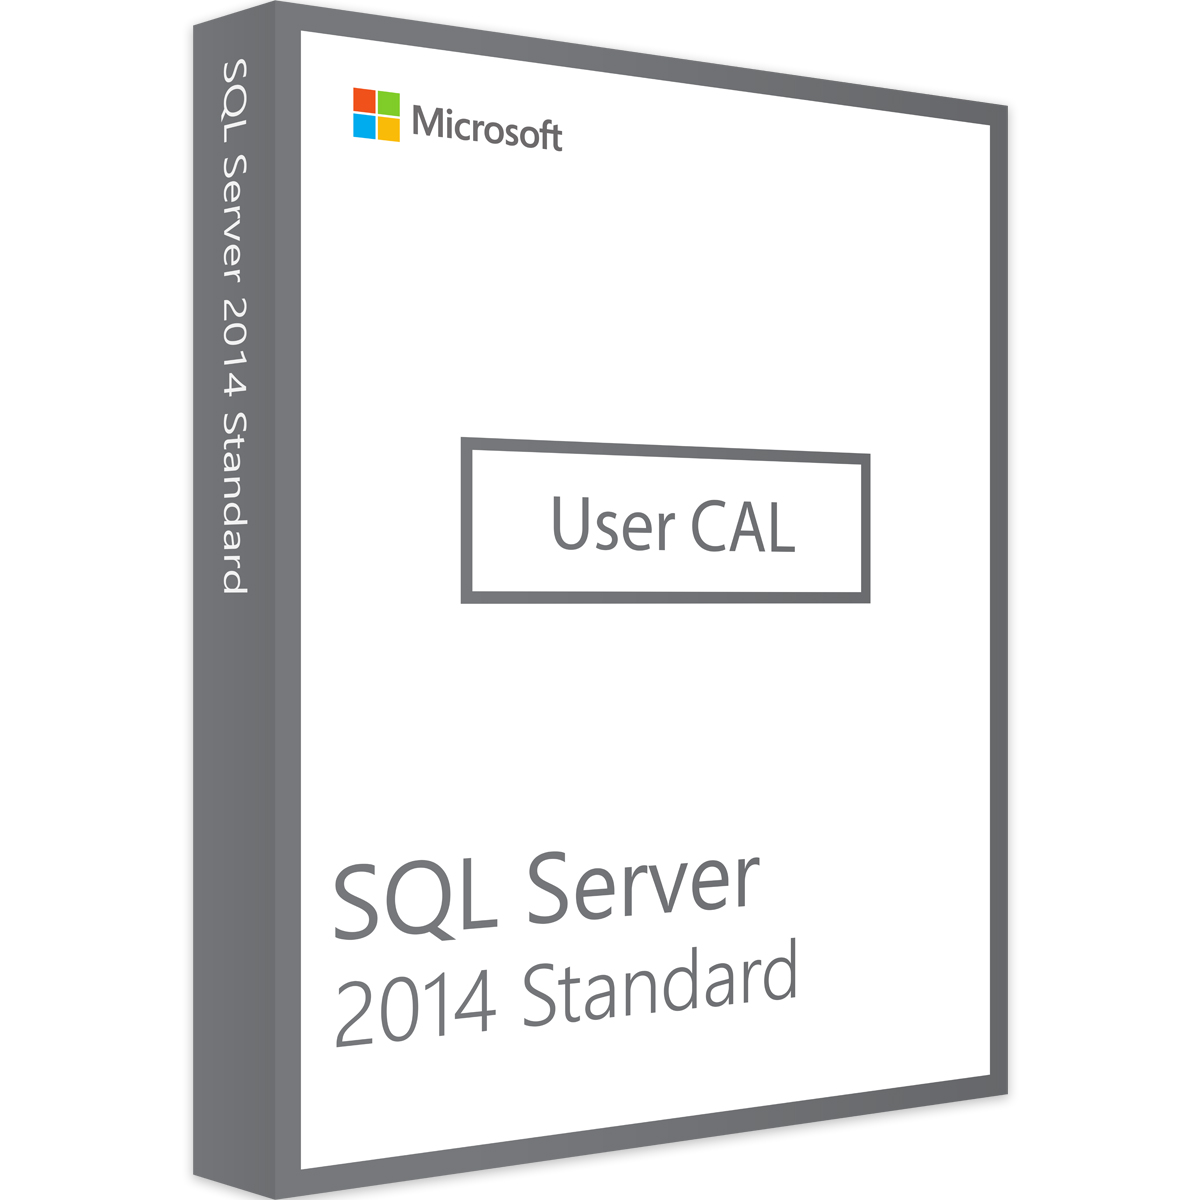 Windows Server 2014. Device cal. Microsoft Identity Manager cal. SQLCAL 2019 SNGL OLP nl USRCAL.